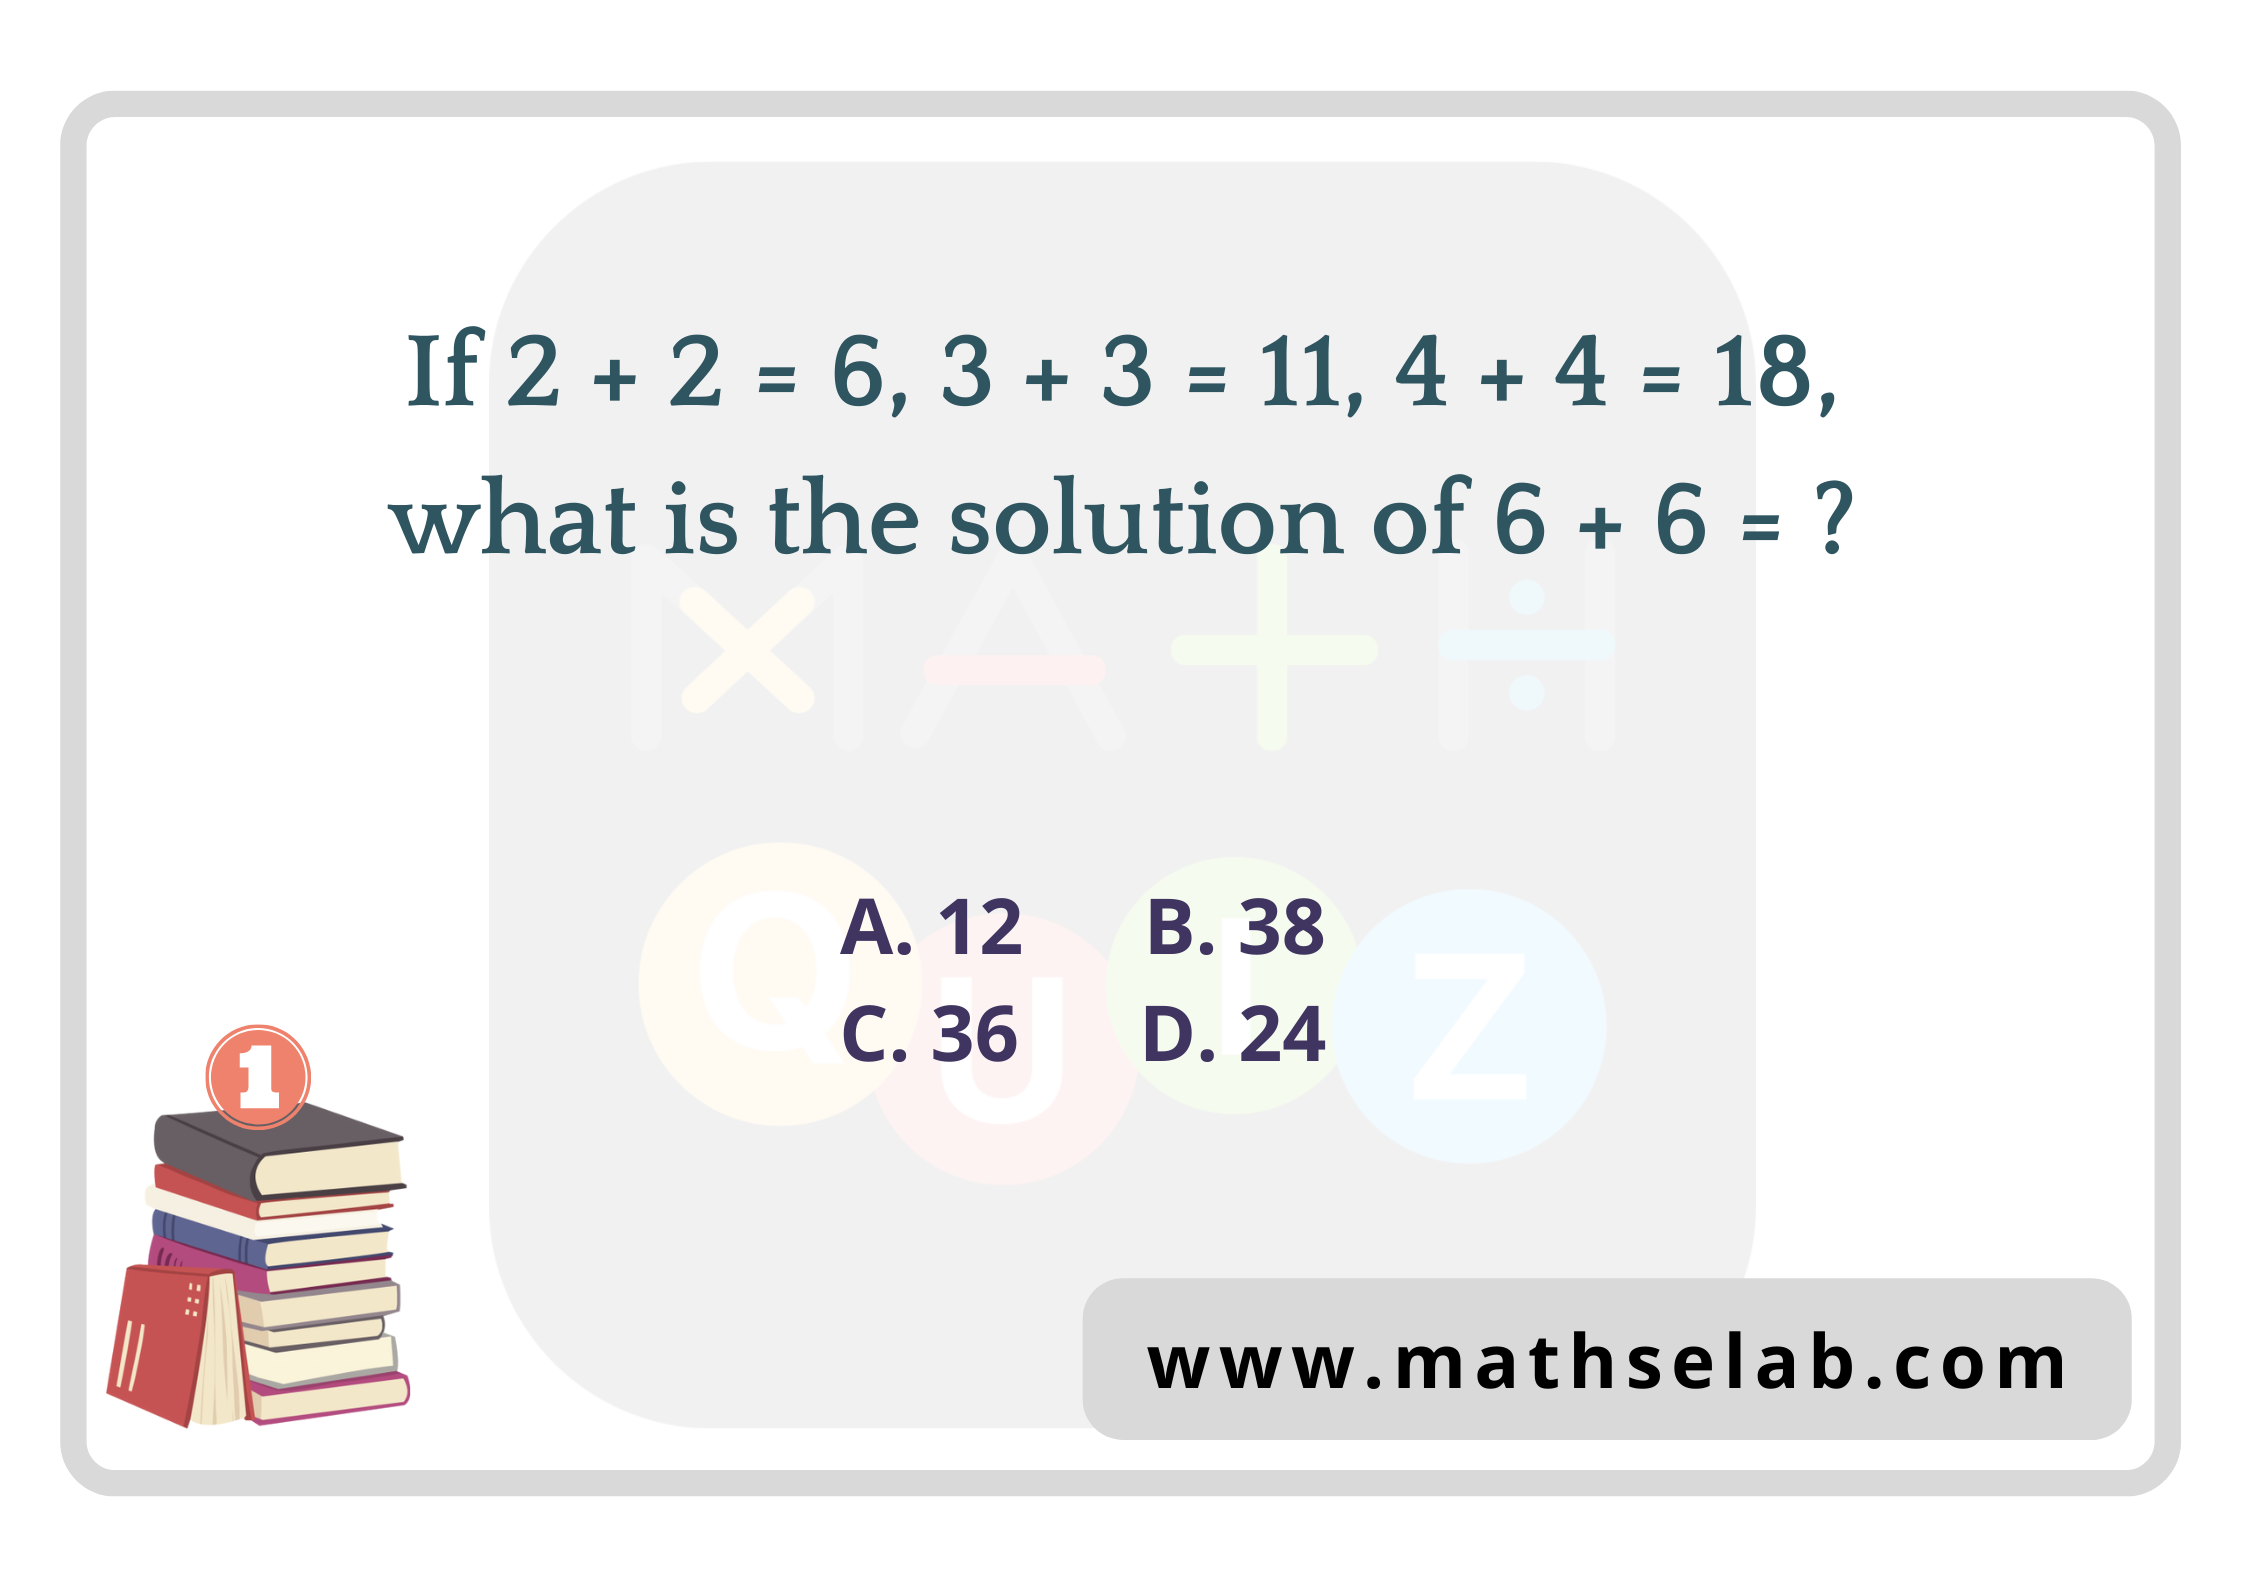 If 2 + 2 = 6, 3 + 3 = 11, 4 + 4 = 18, what is the solution of 6 + 6 = ?